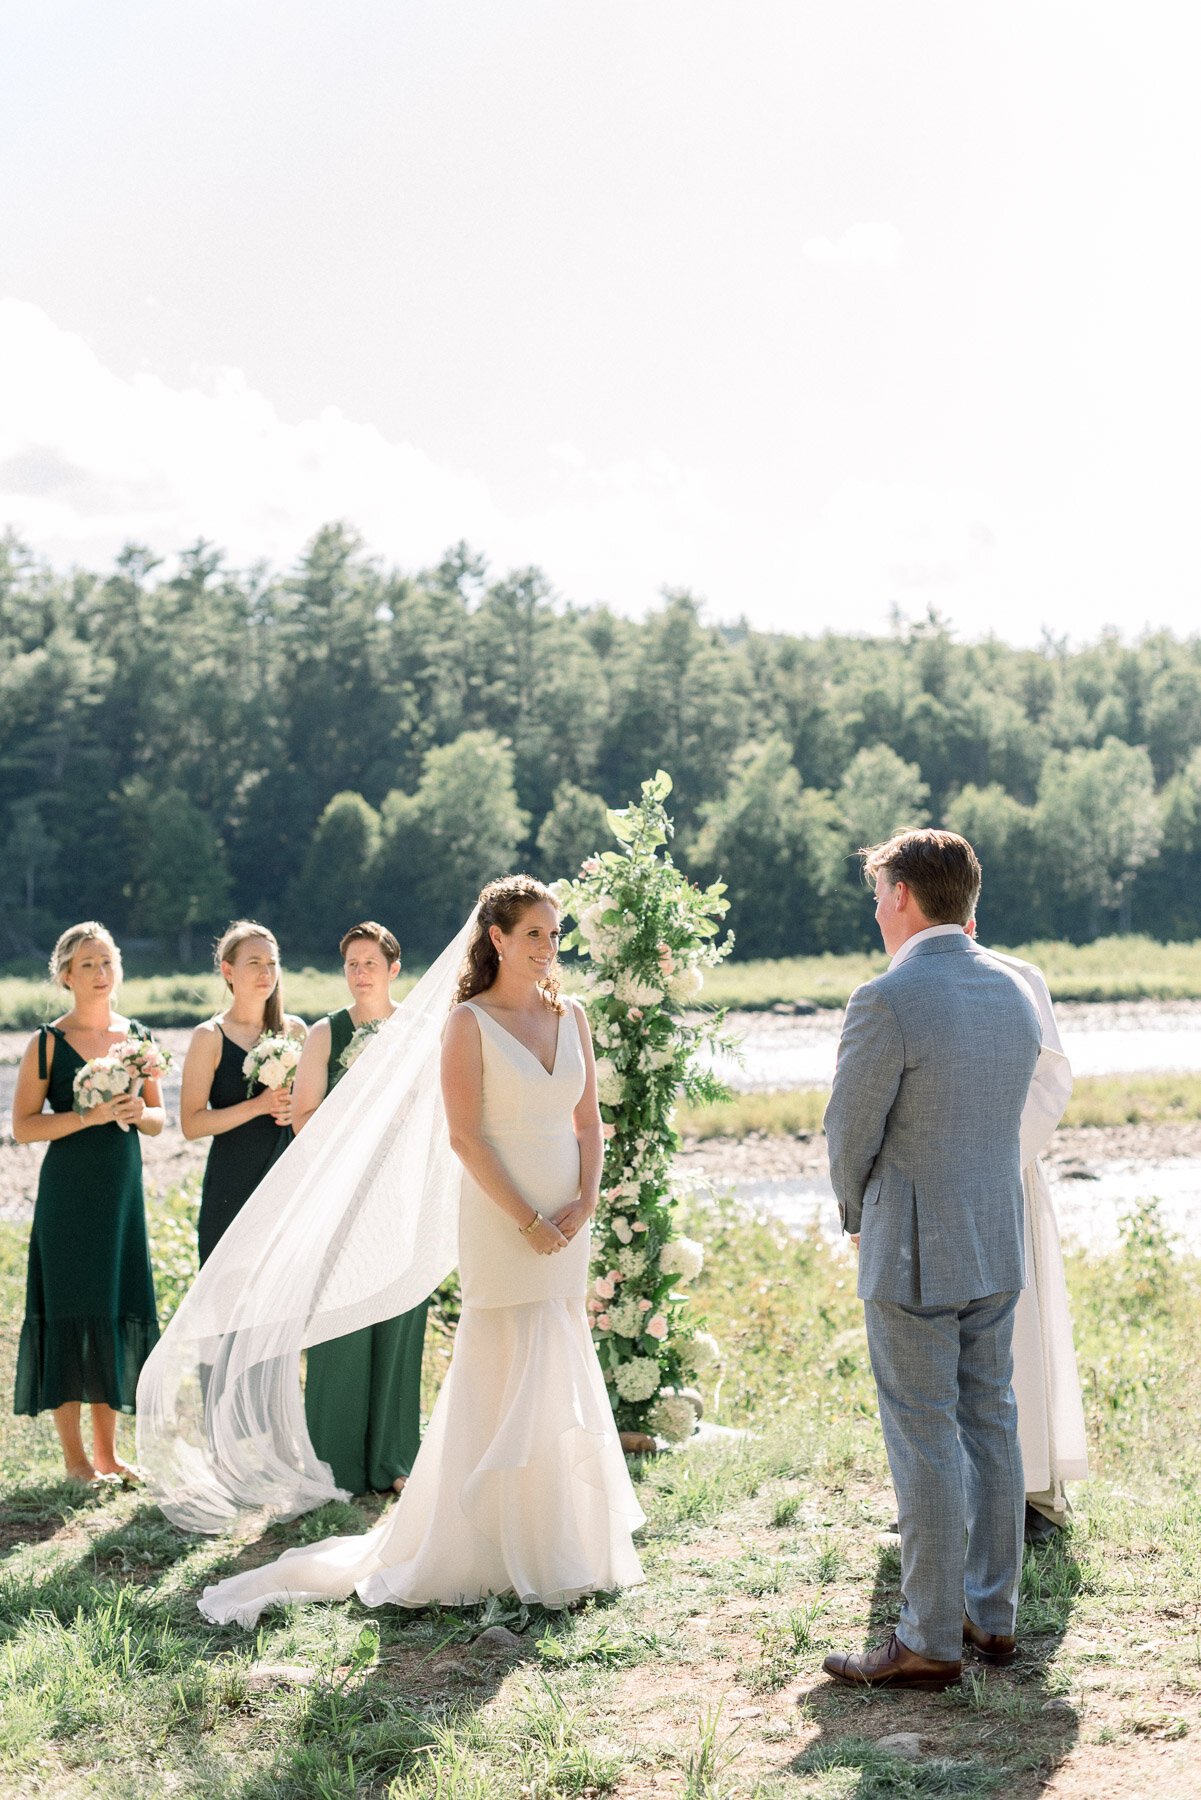 Upstate NY Private Estate Wedding with Christine Wheat Events and Renaissance Floral Design